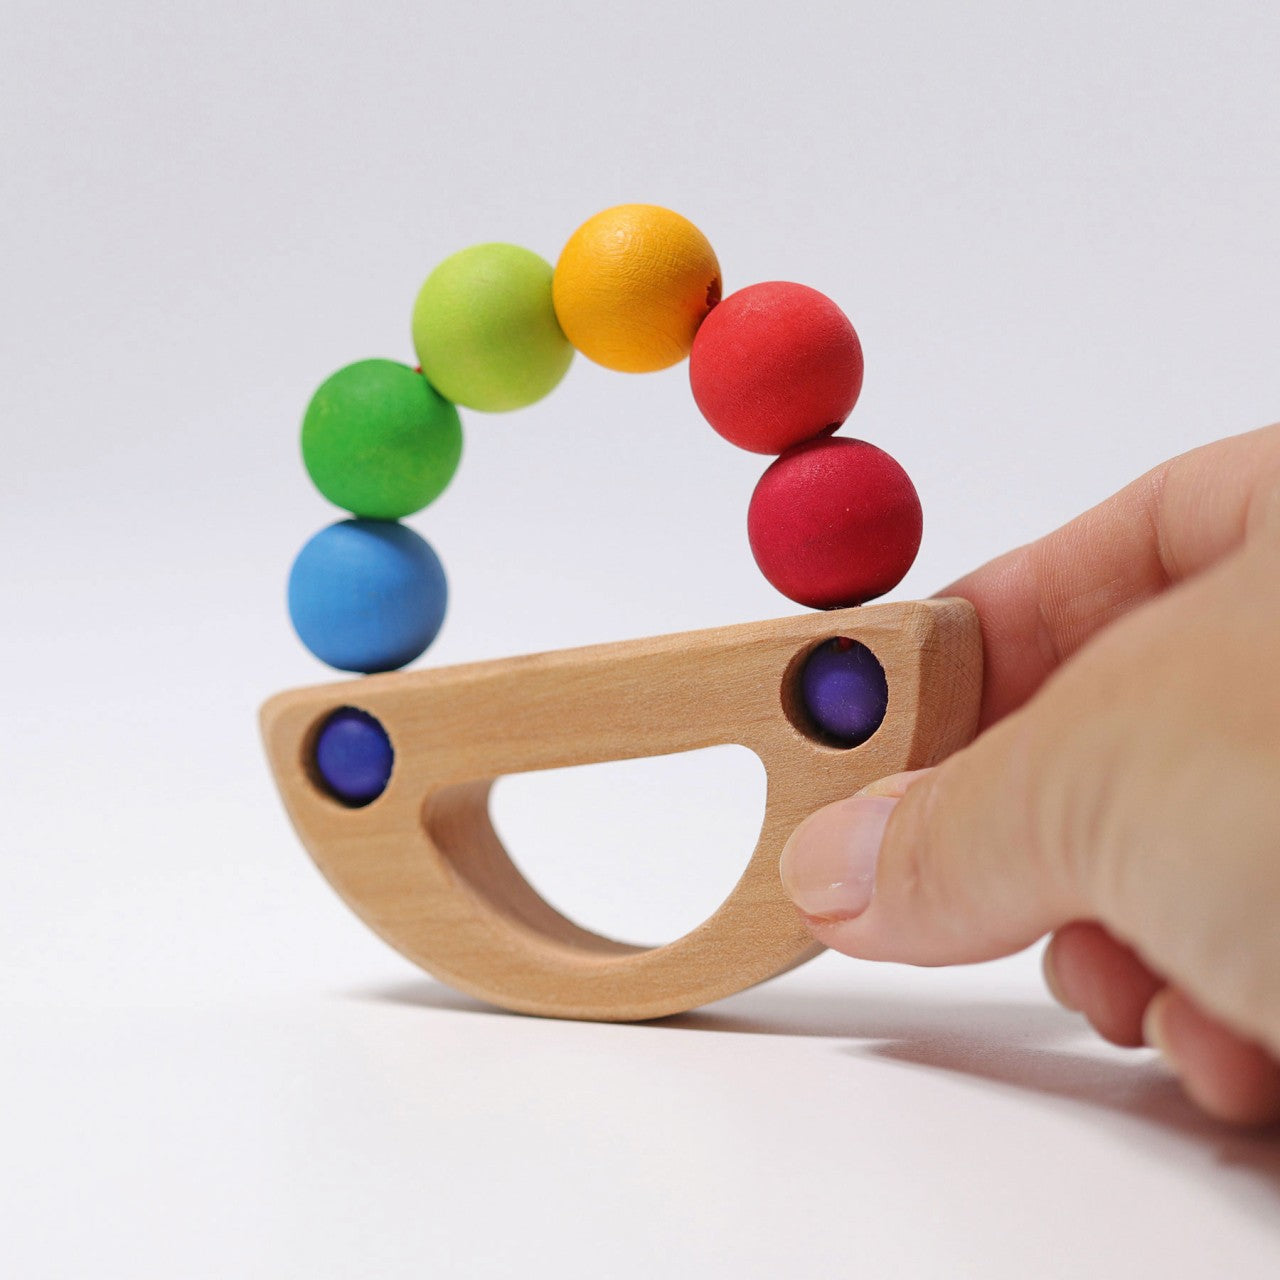 Rainbow Boat Grasping Toy | Baby’s First Wooden Toy